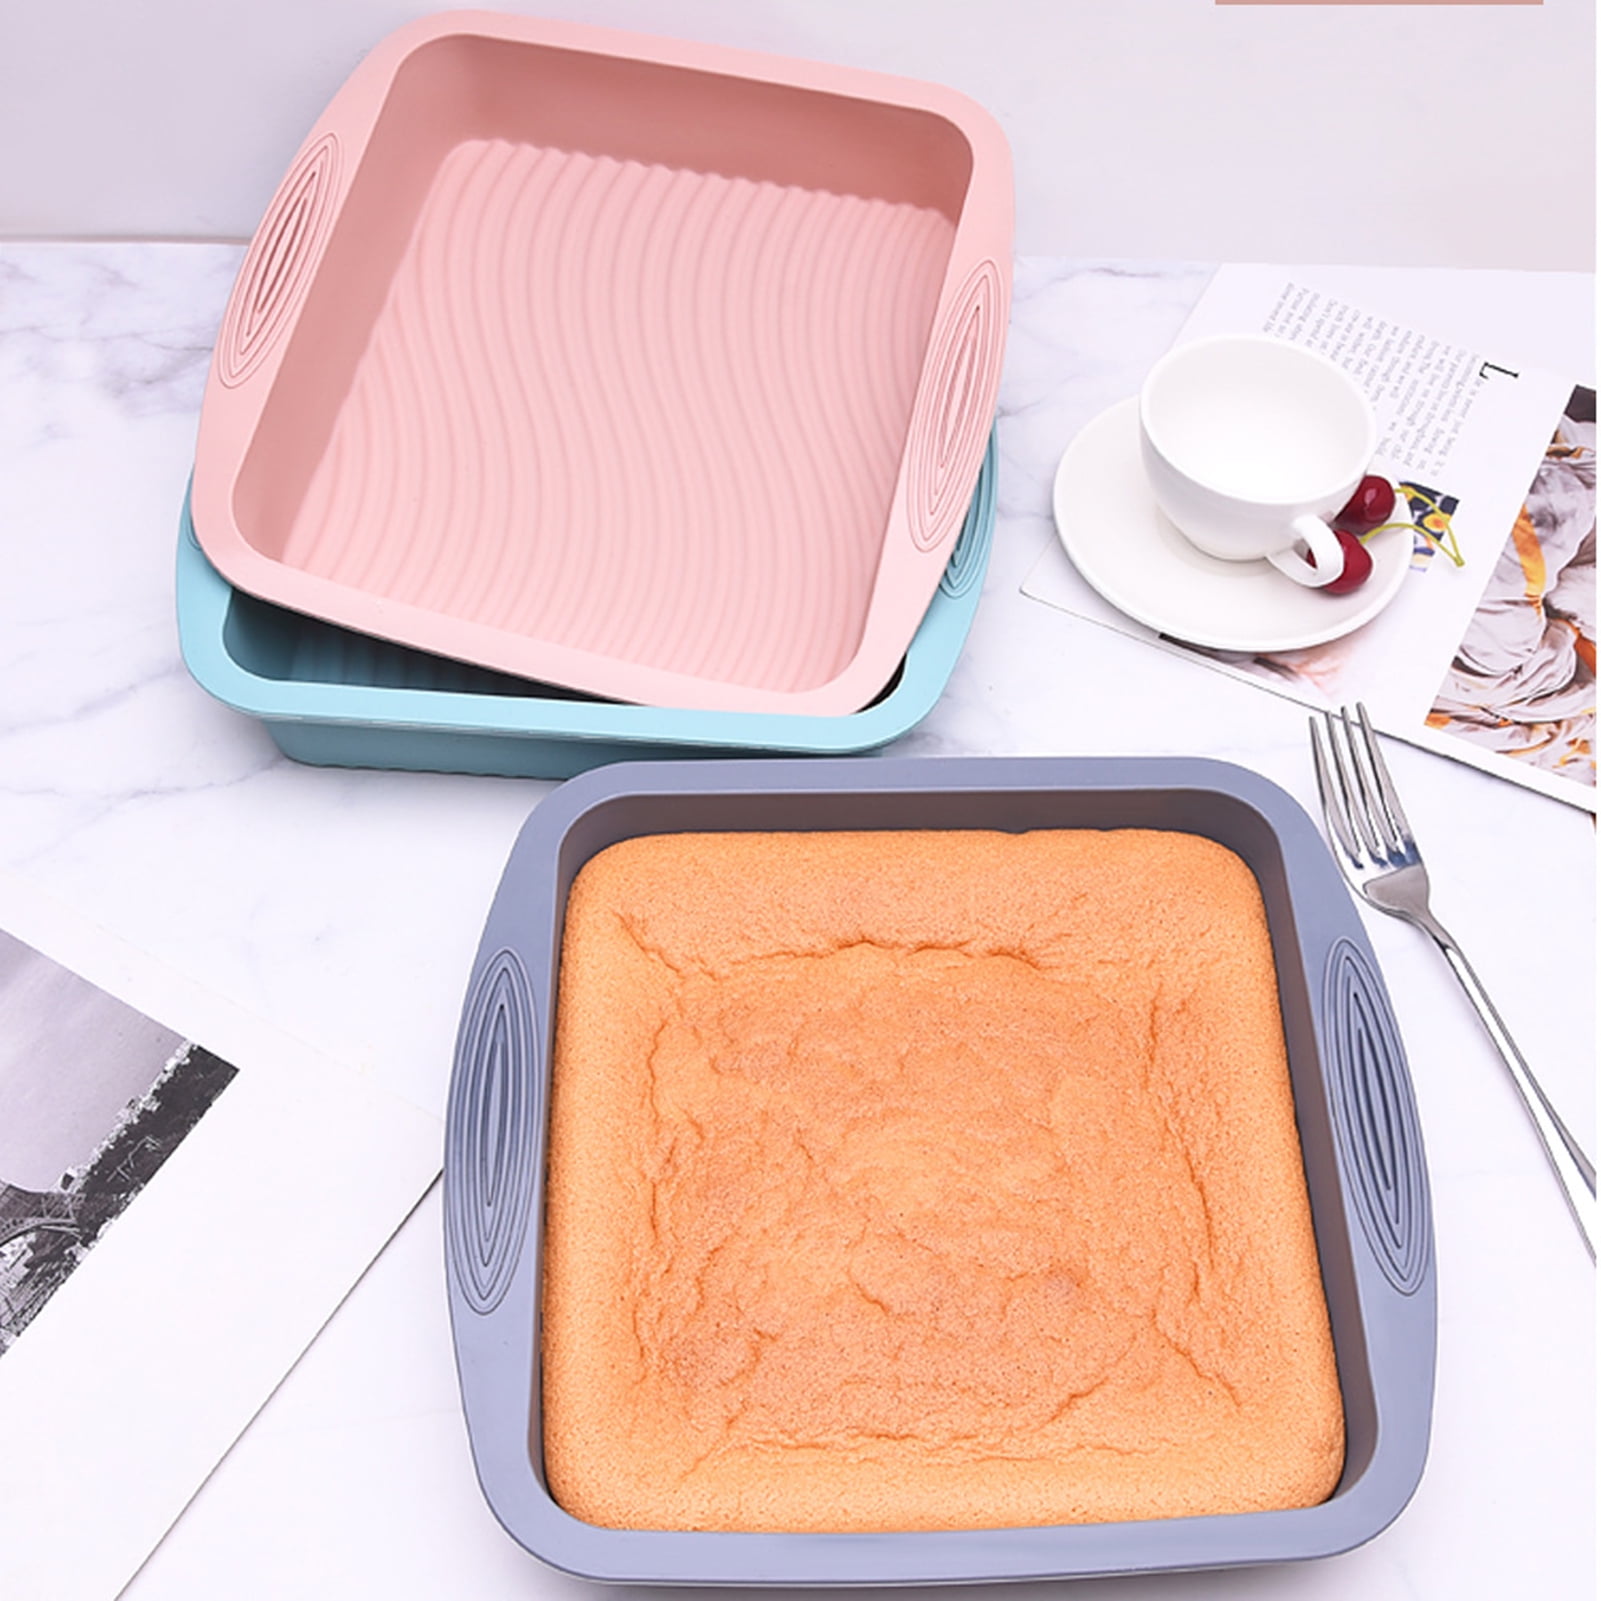 Poatren Silicone Cake and Brownie-Pan Nonstick Silicone Baking Mold for Cake,Bread,Pie, Size: One size, Red